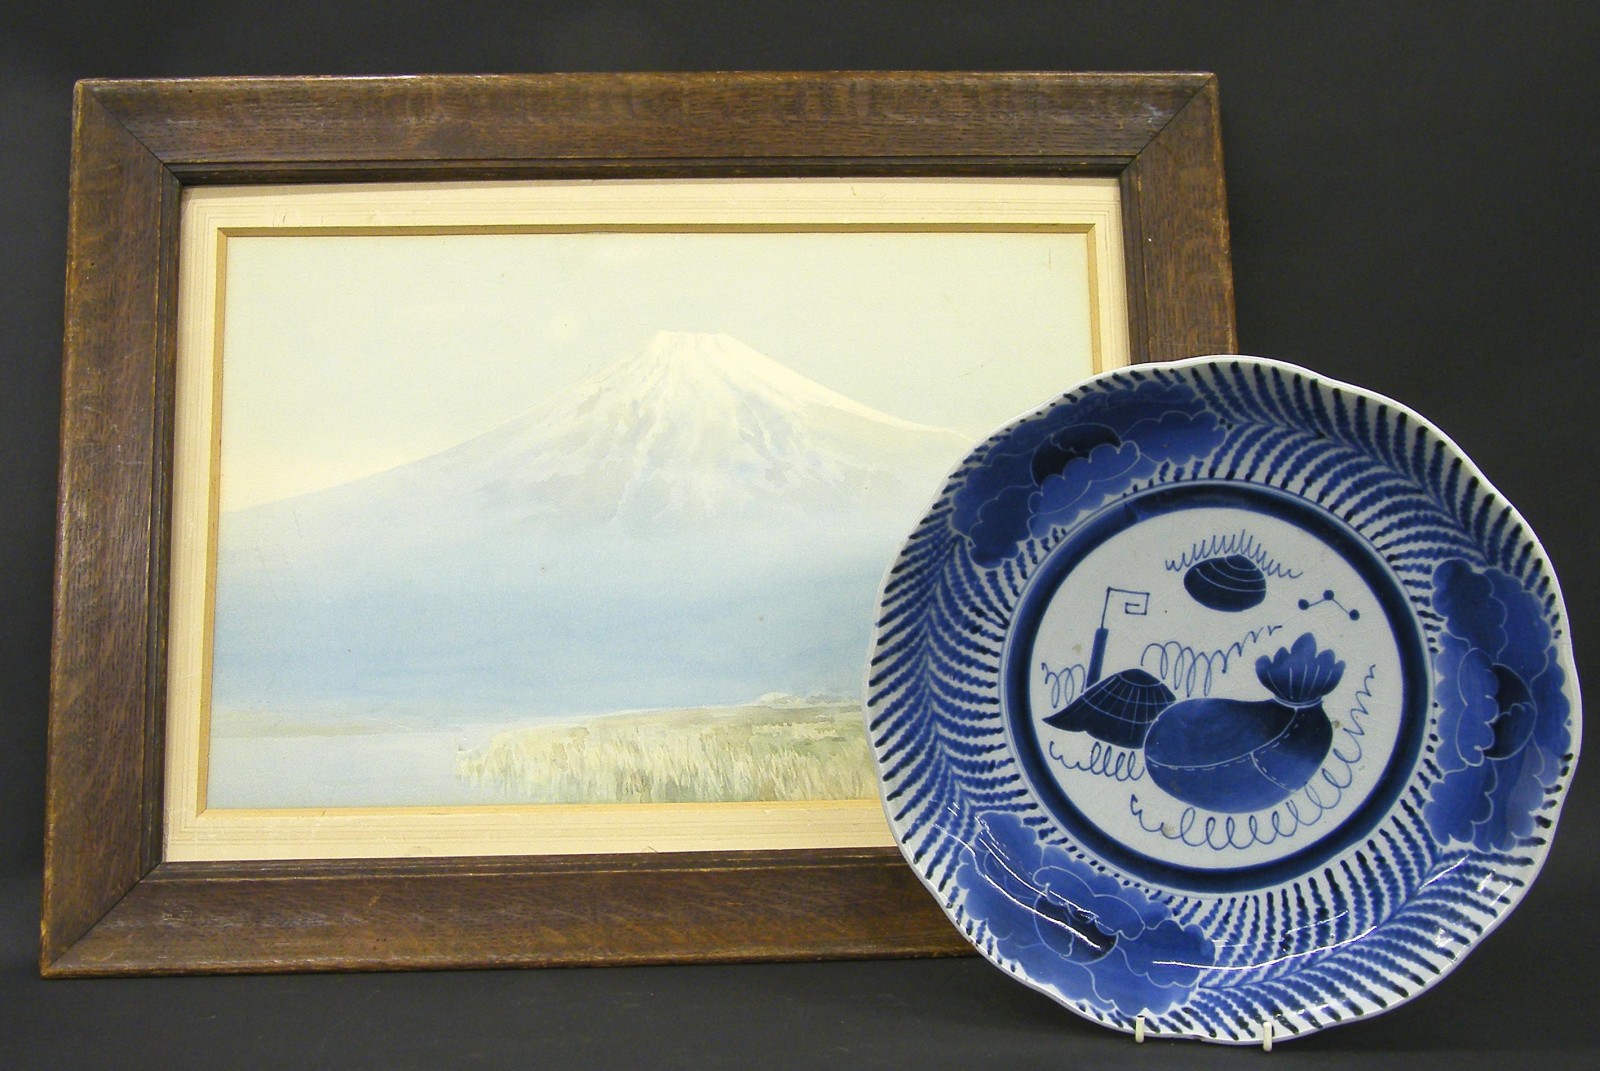 Chinese blue and white porcelain charger plate, 12.5" diameter; Japanese School - landscape study of